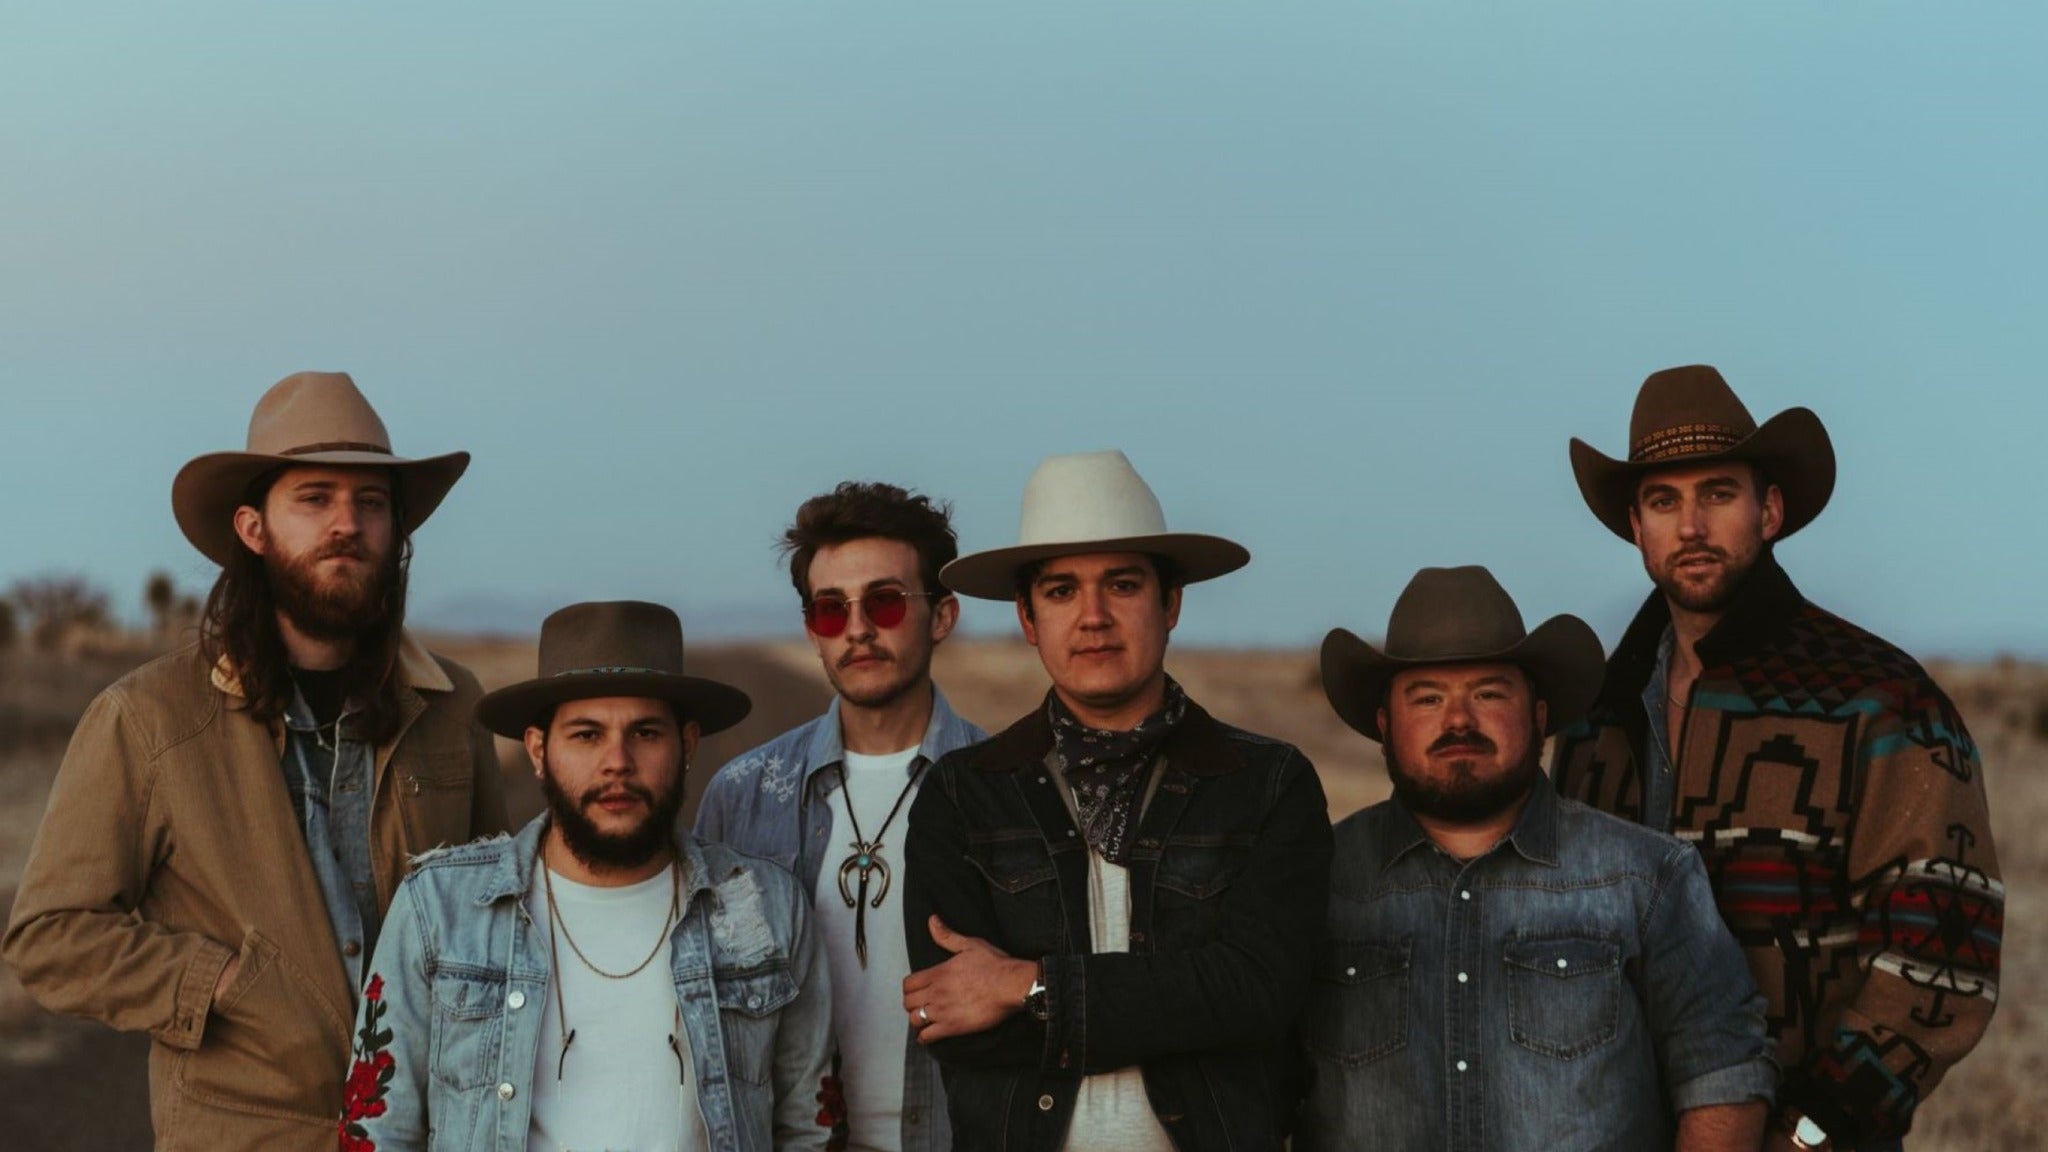 SORRY, THIS EVENT IS NO LONGER ACTIVE<br>Flatland Cavalry, Grady Spencer & The Work at Grizzly Rose - Denver, CO 80216